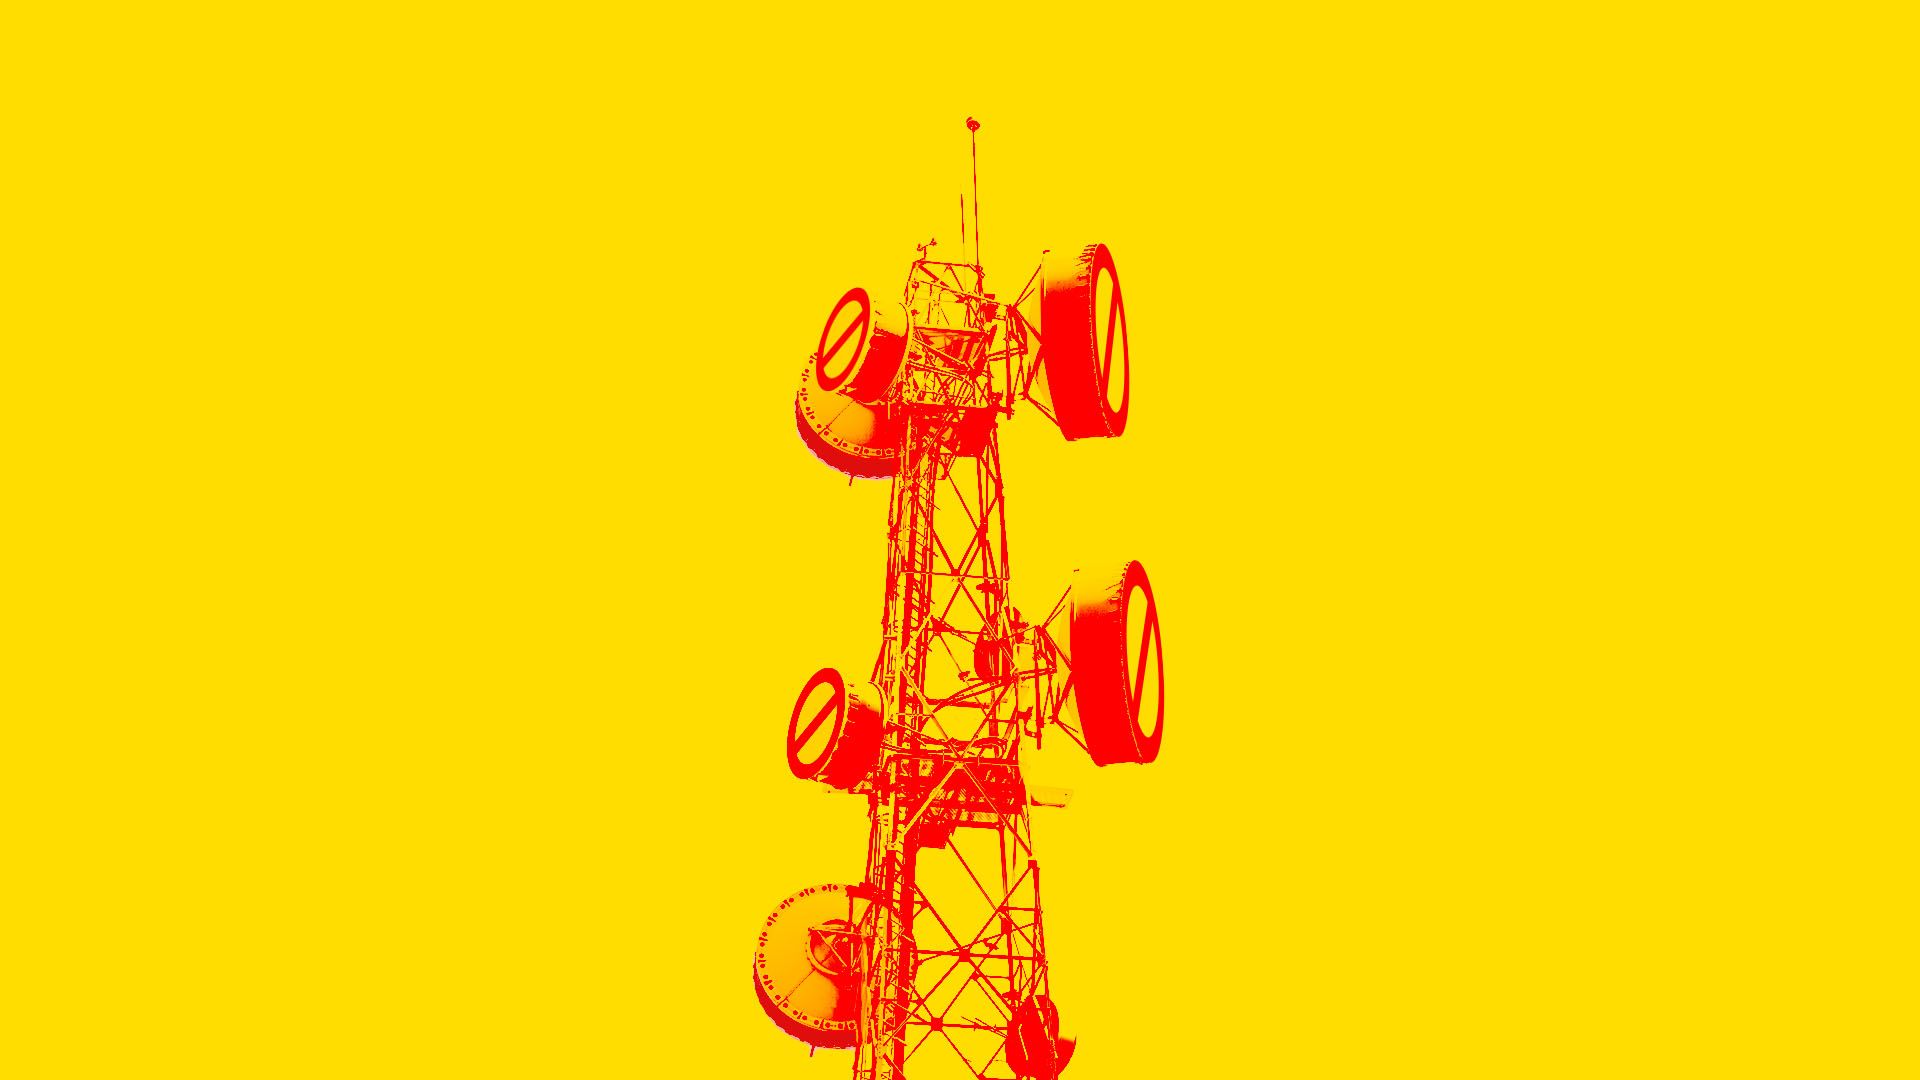 Illustration of a telecommunications tower with the red ban sign over satellite dishes